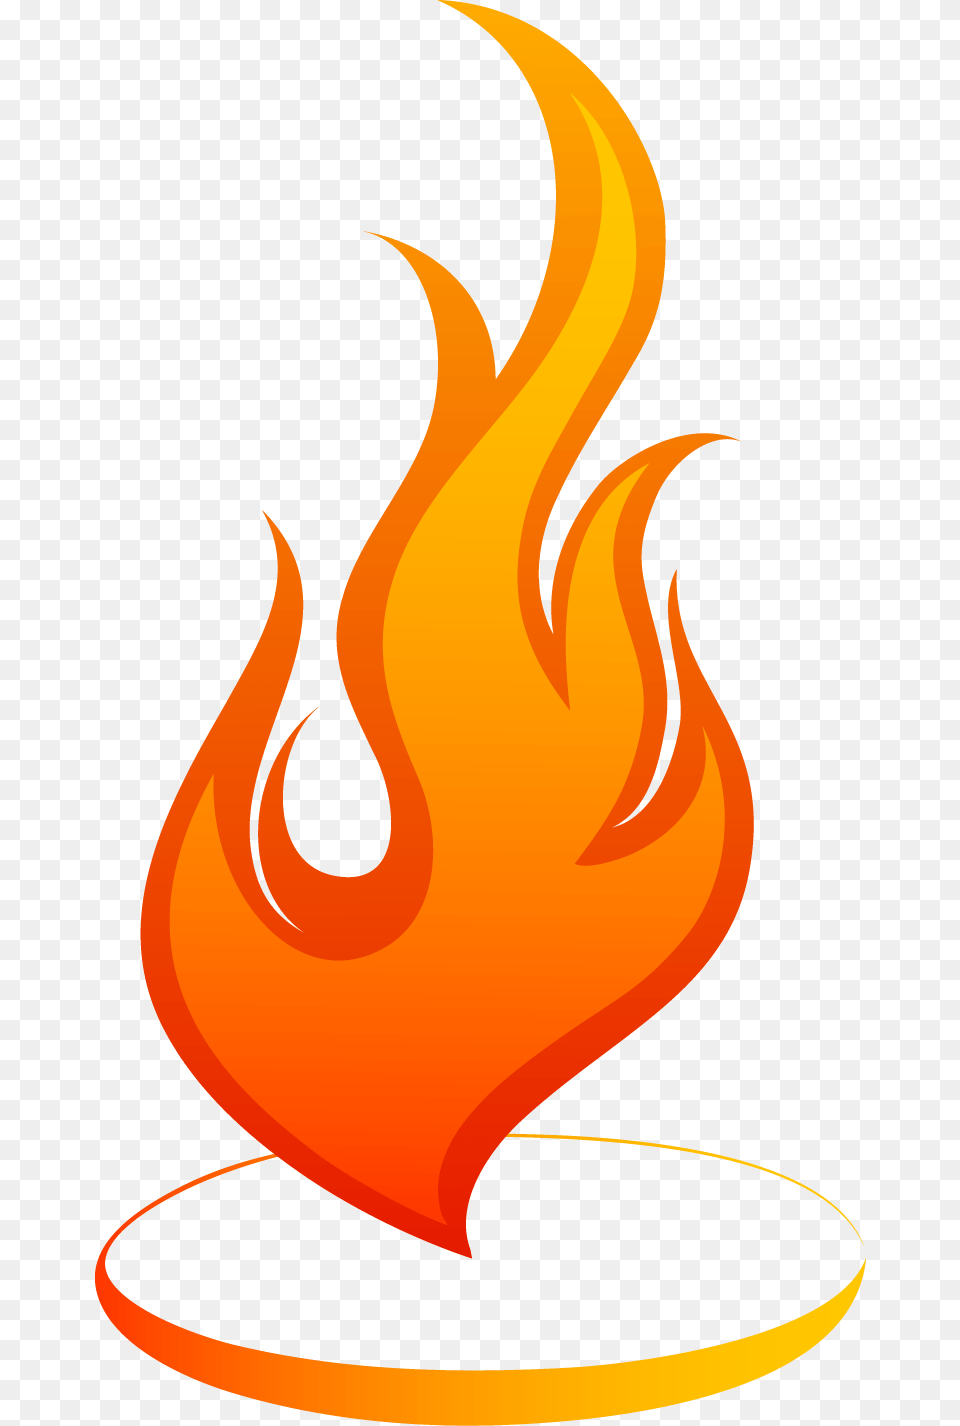 Explosion Fiery Fireball Flaming Flammable Frame Frame Of Fire, Flame Png Image